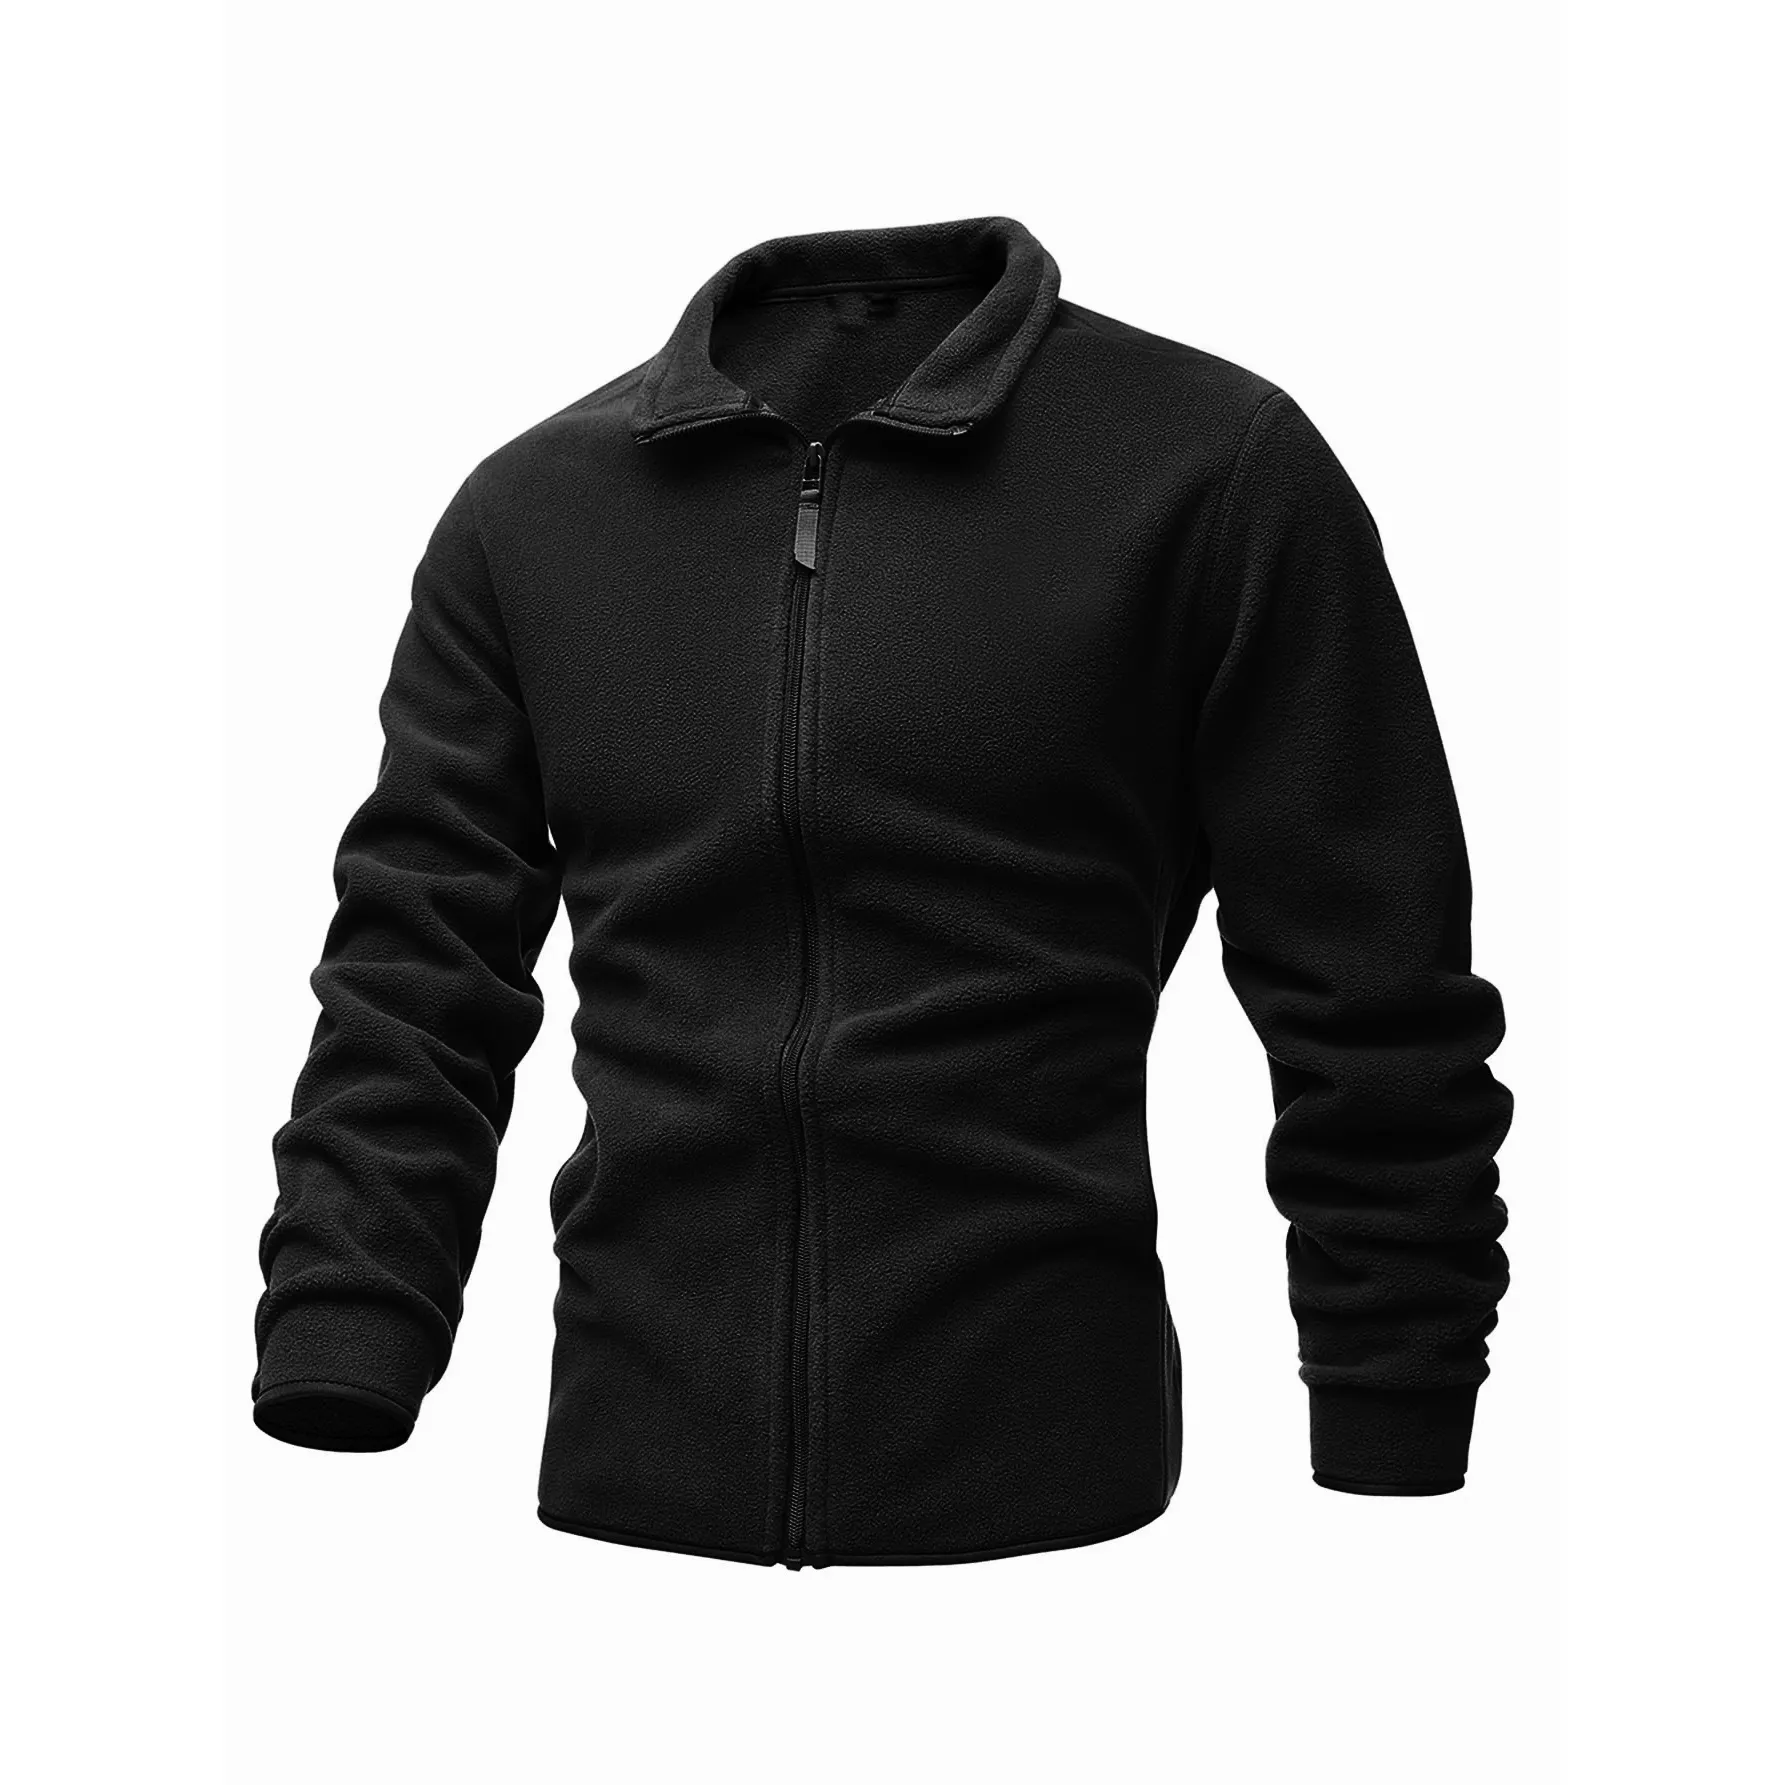 Slim Double-sided Velvet Tactical Sweater Casual Mock Neck Zipper Black Camouflage for Man Jacket Tactical